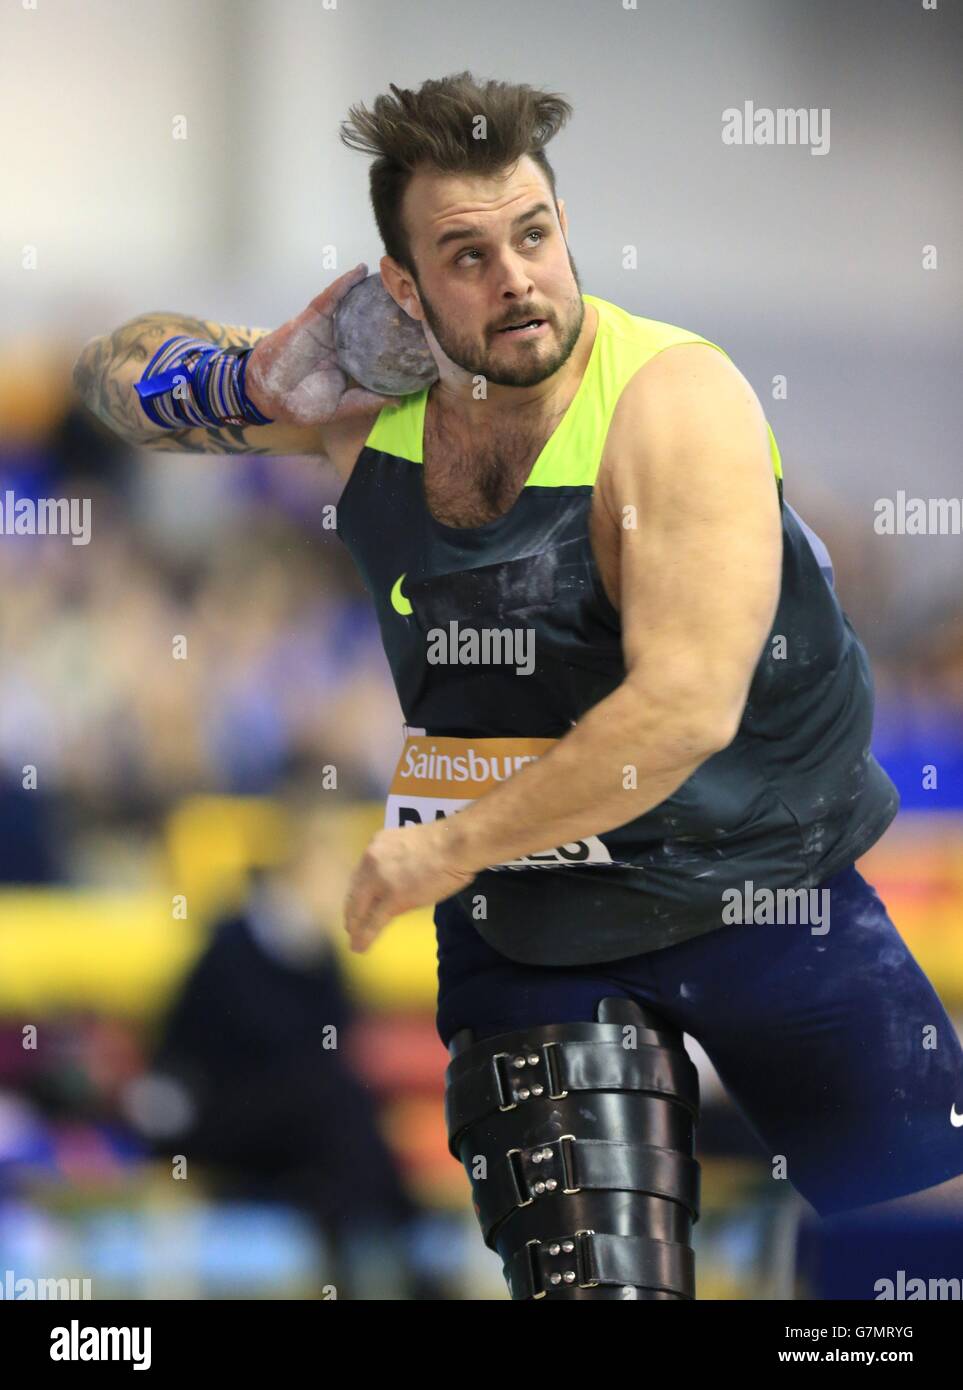 Aled Davies in the mens shot put final during day two of the Sainsbury's British Indoor Championships at the English Institute of Sport, Sheffield. Stock Photo